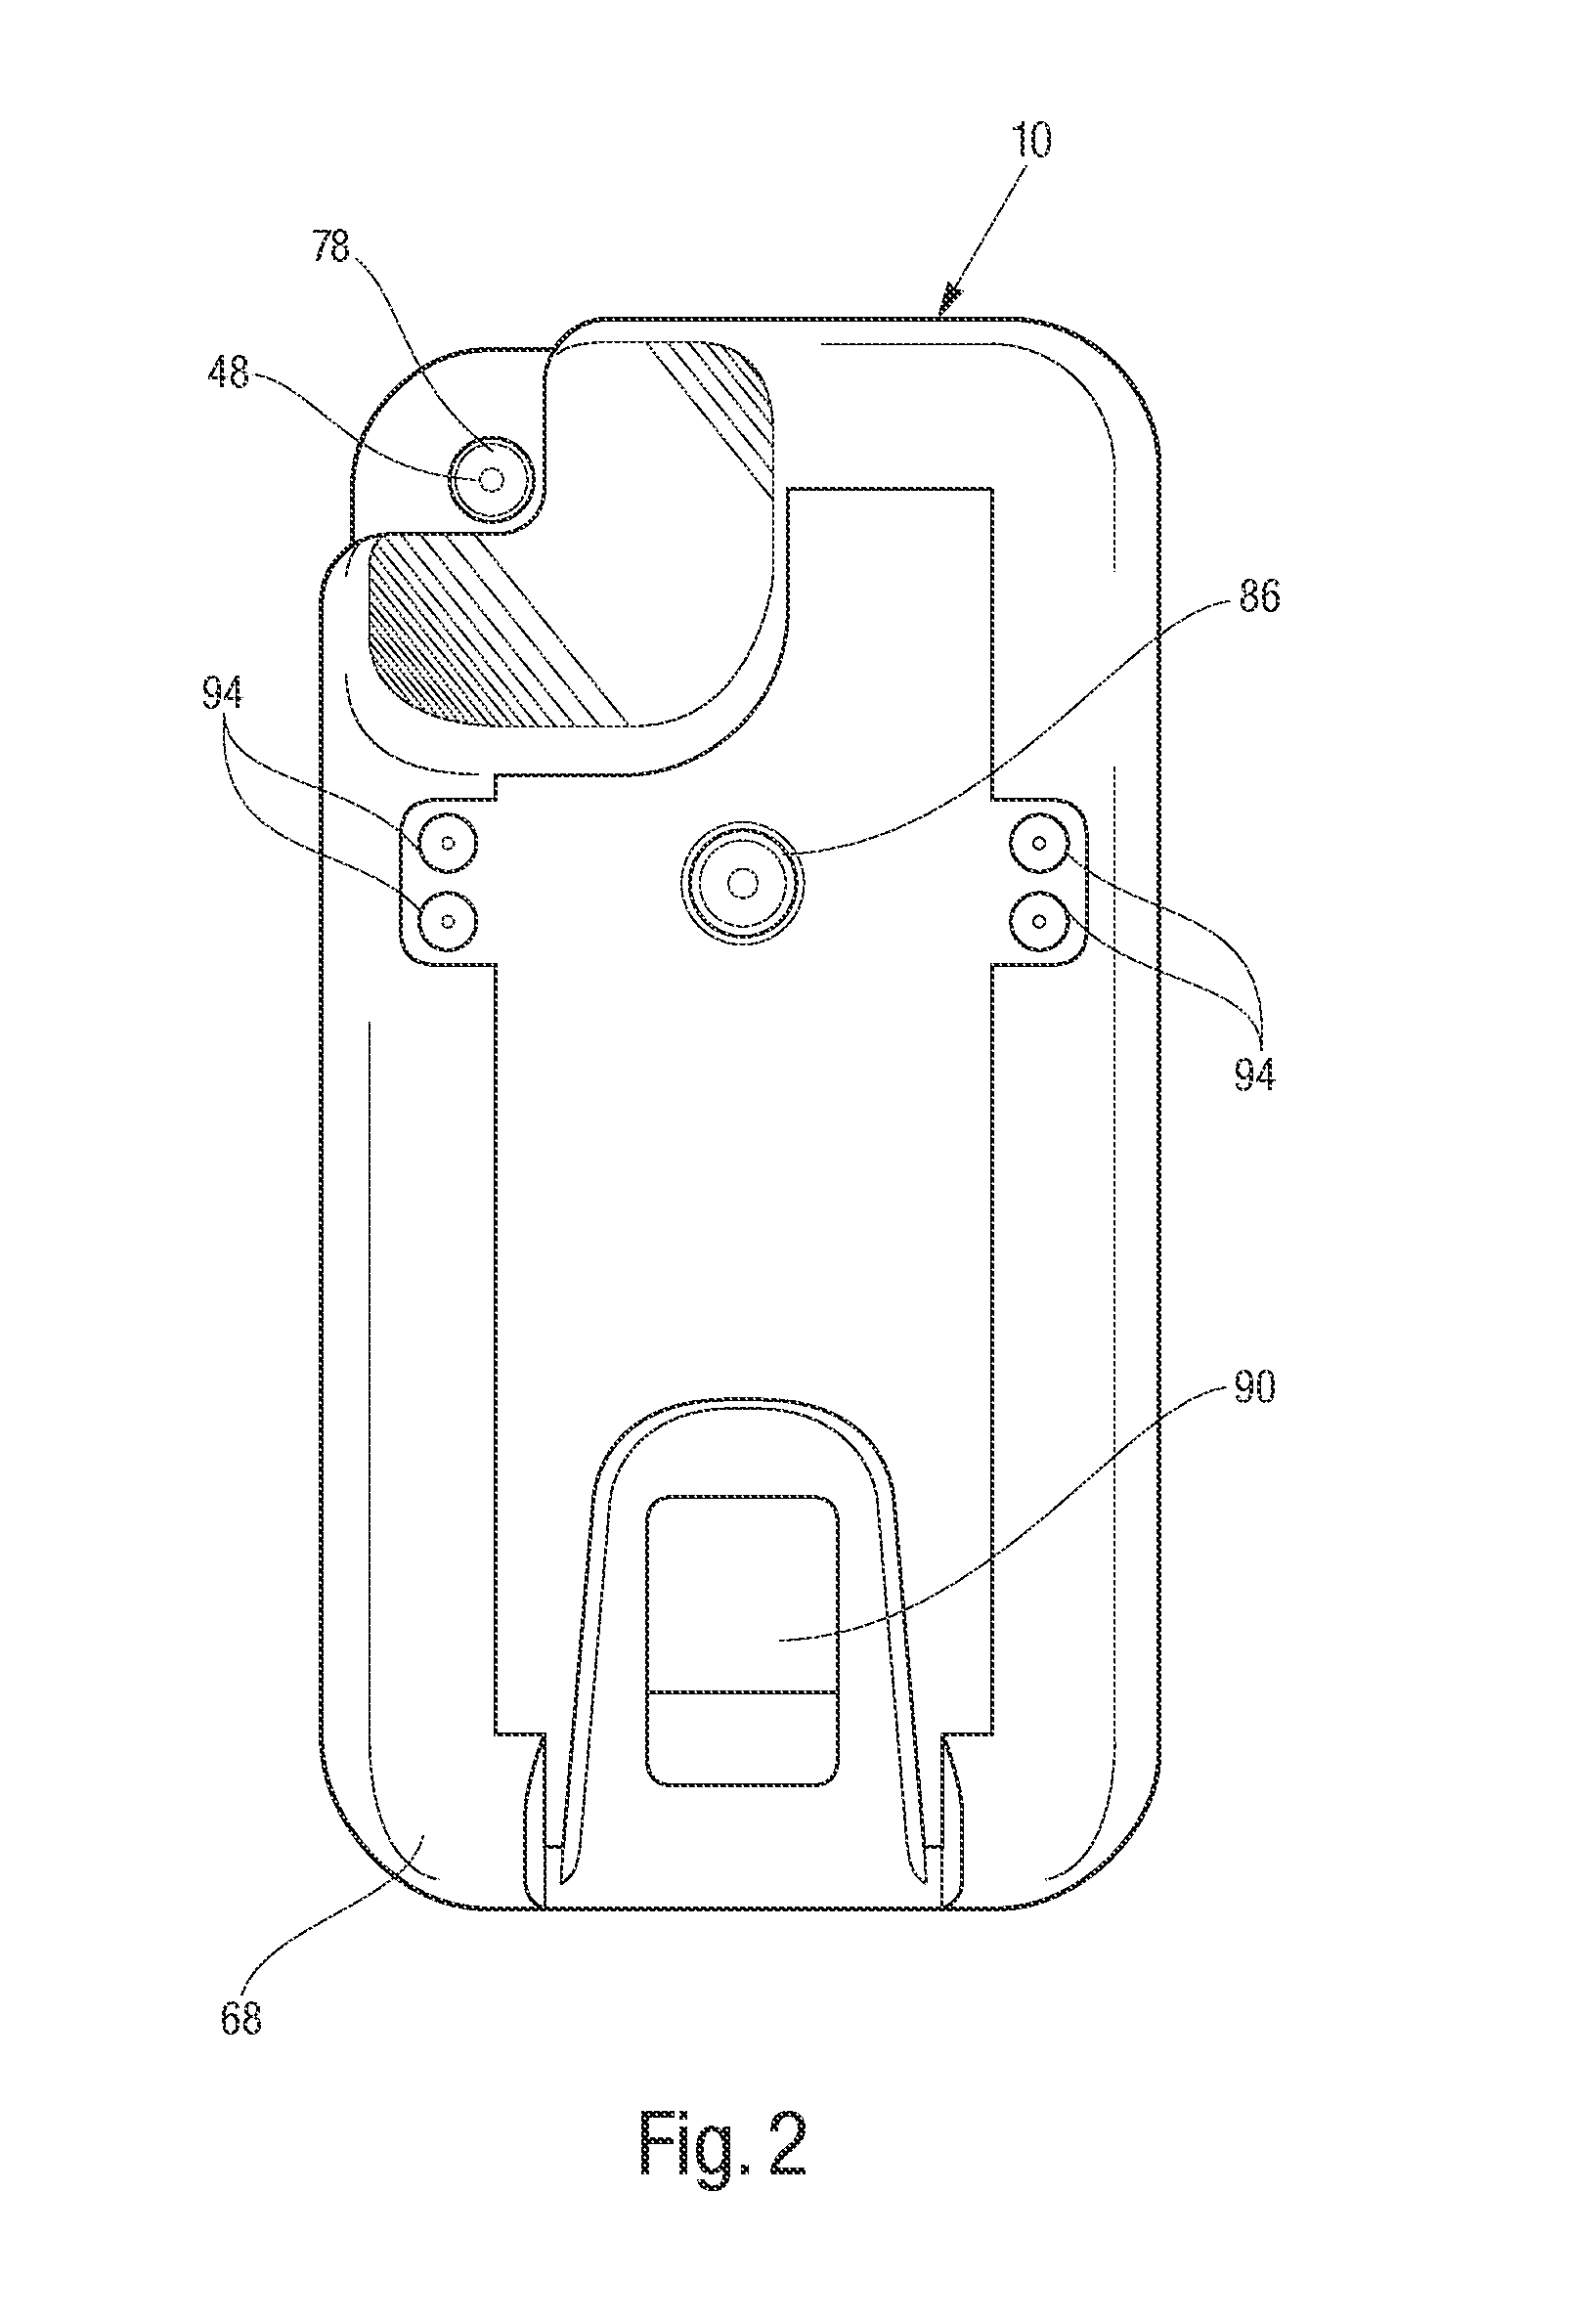 Mobile, wireless hand-held biometric capture, processing and communication system and method for biometric identification